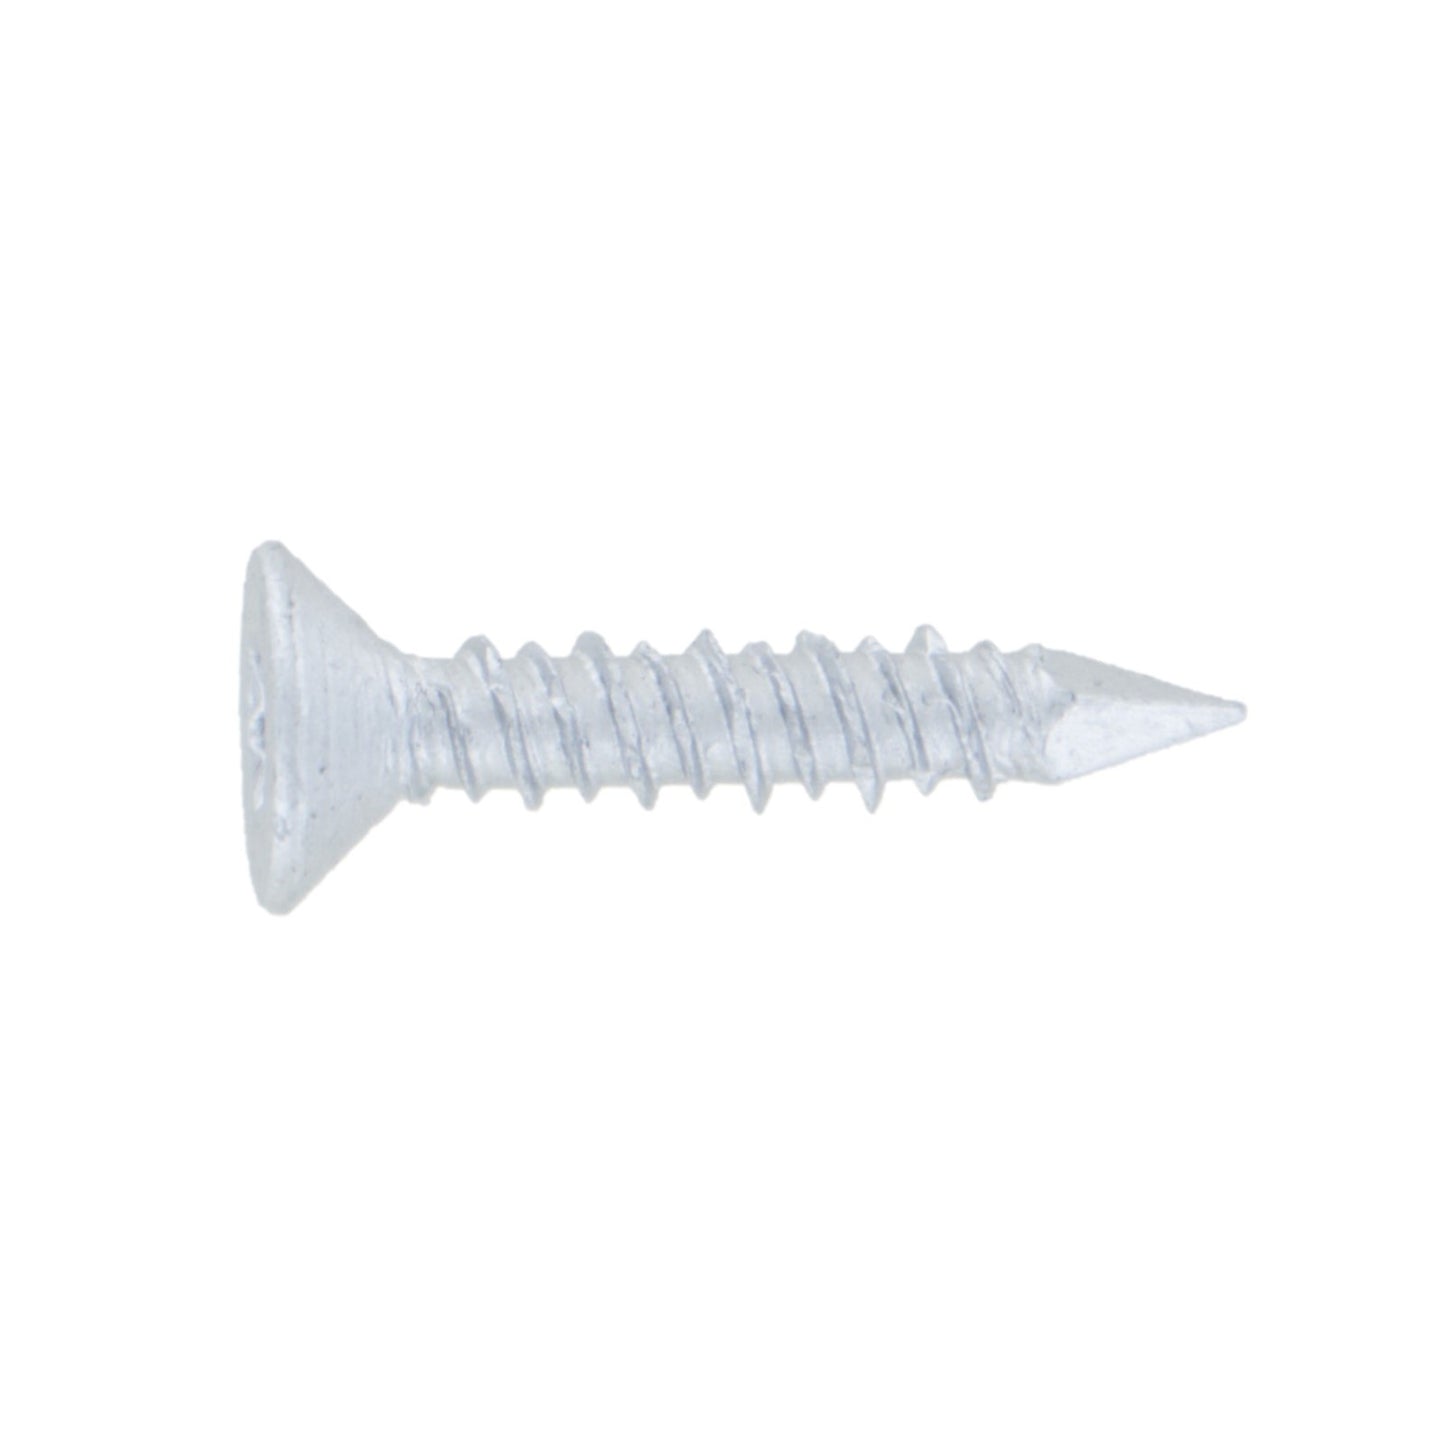 14 inch x 114 inch Fasteners Plus T30 Flat Head Concrete Screw 410 Stainless Steel Pkg 100 image 1 of 2